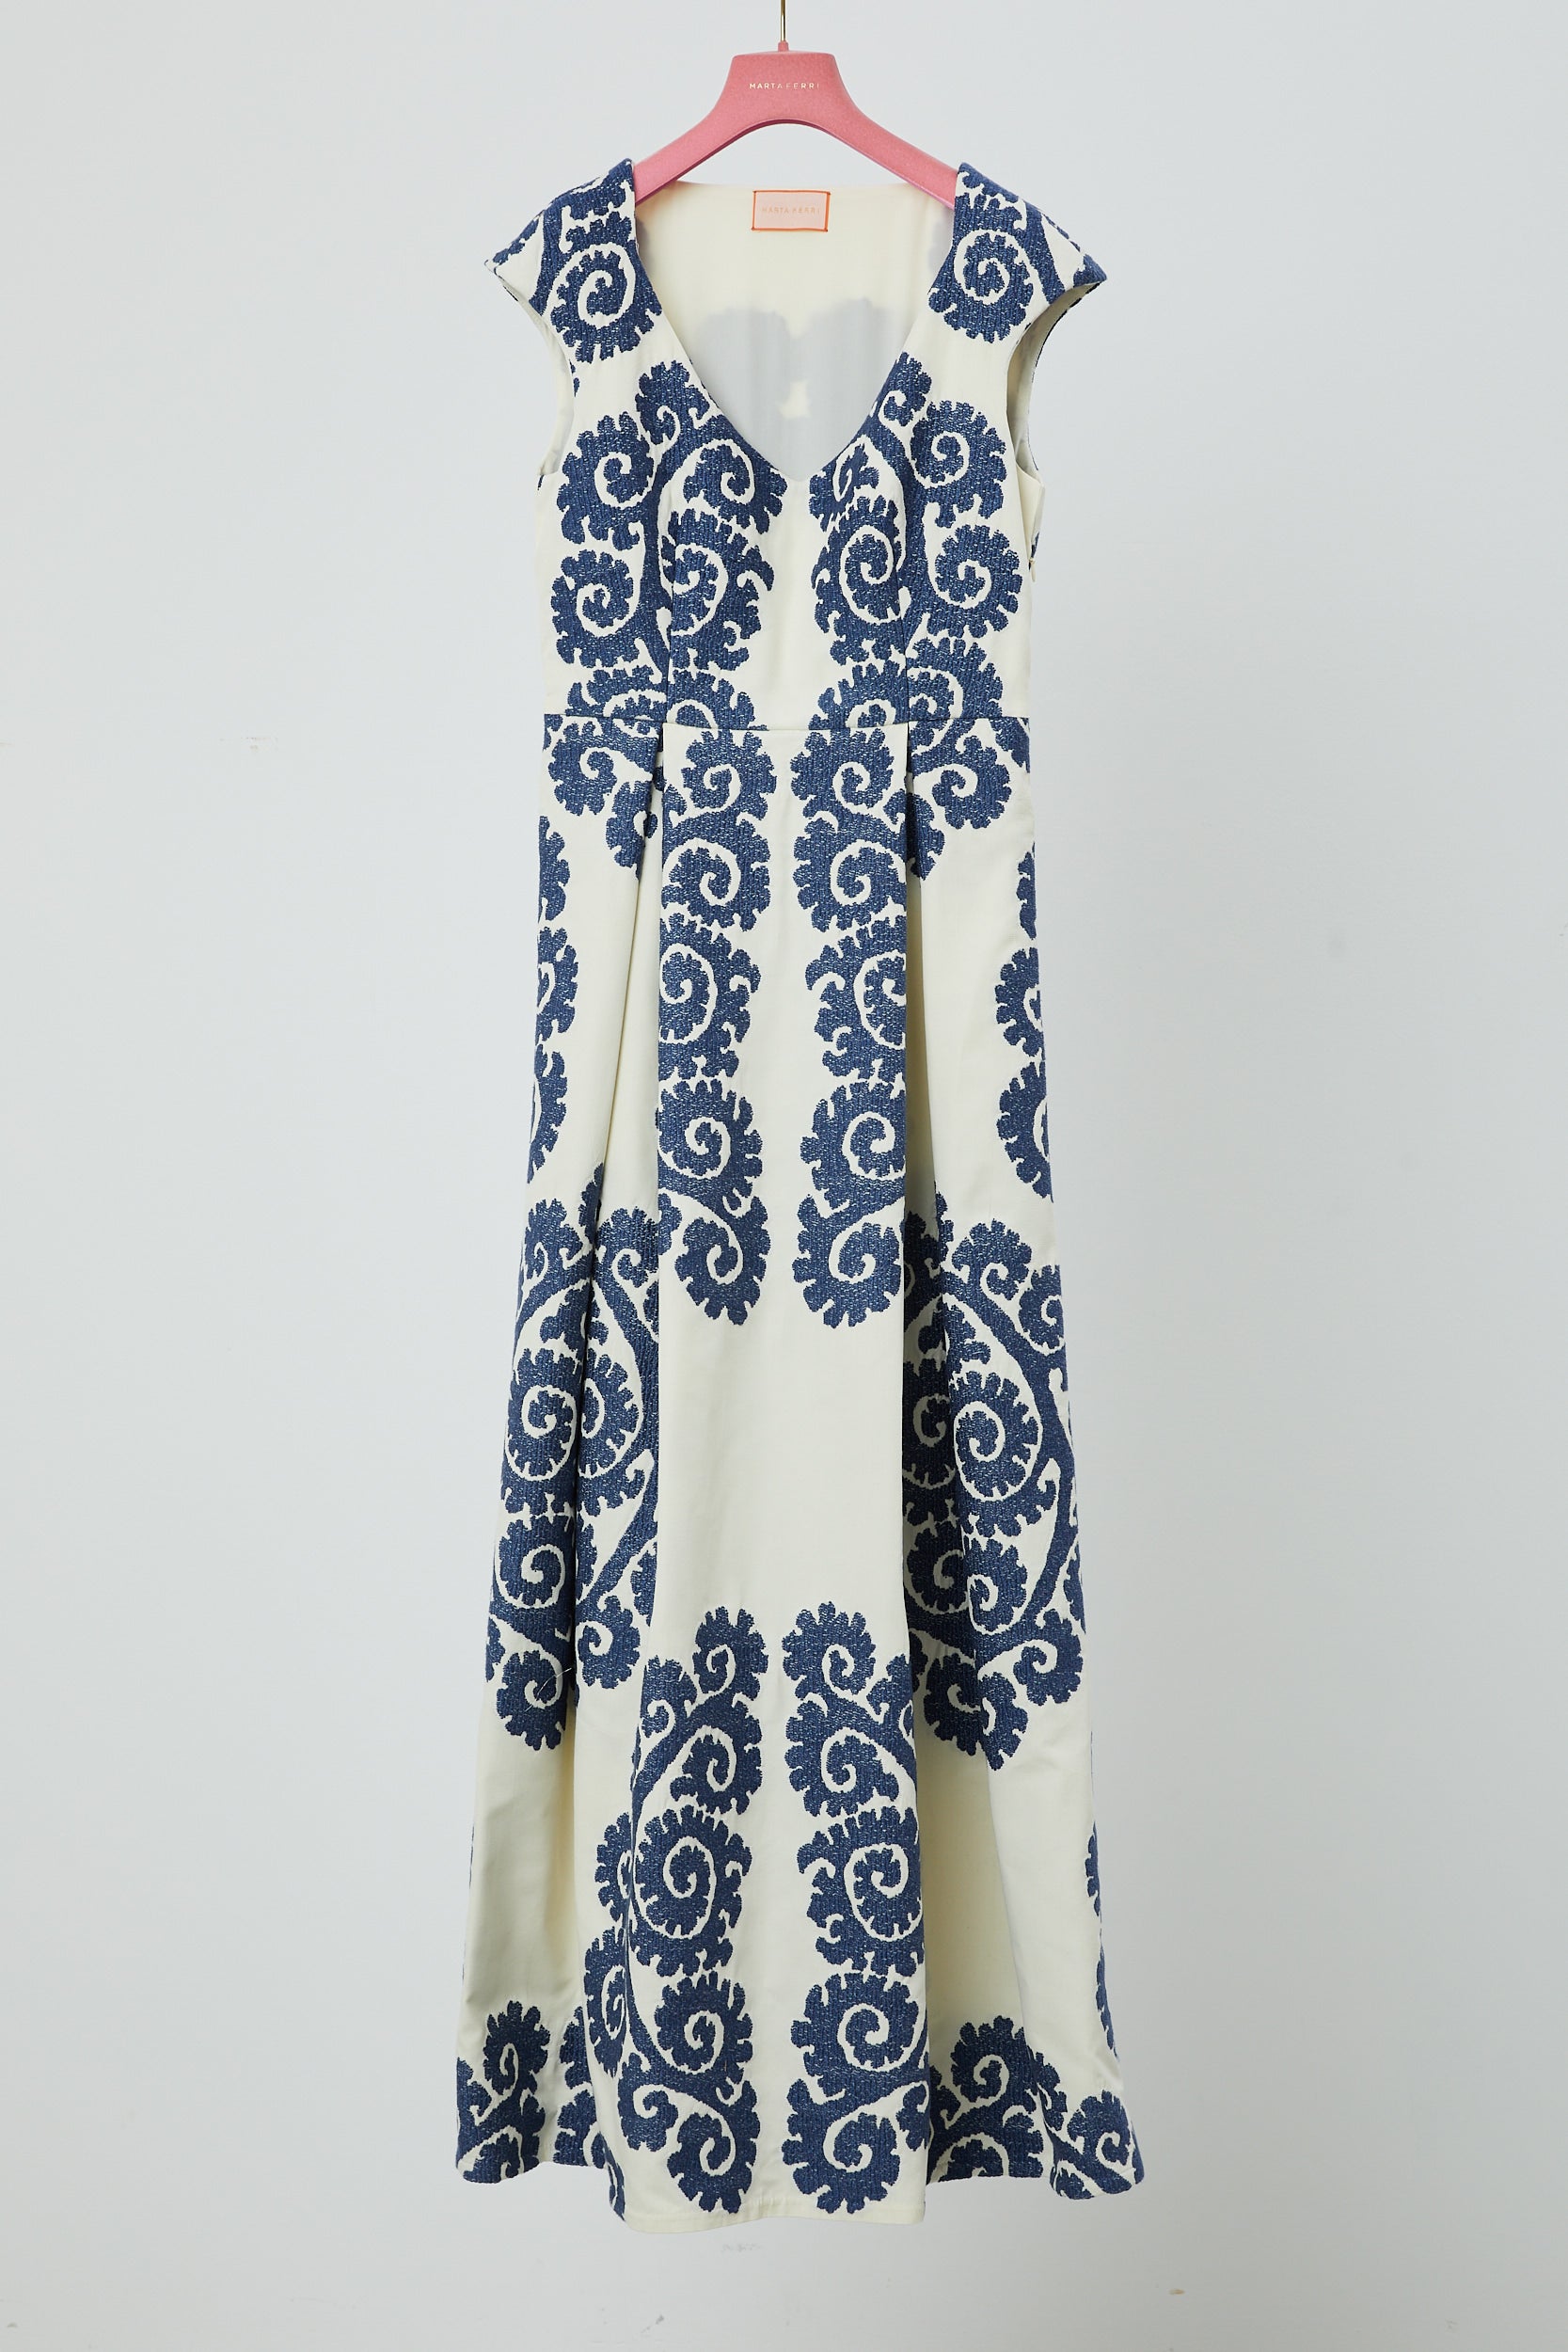 EMBROIDERED DRESS WHITE & BLUE